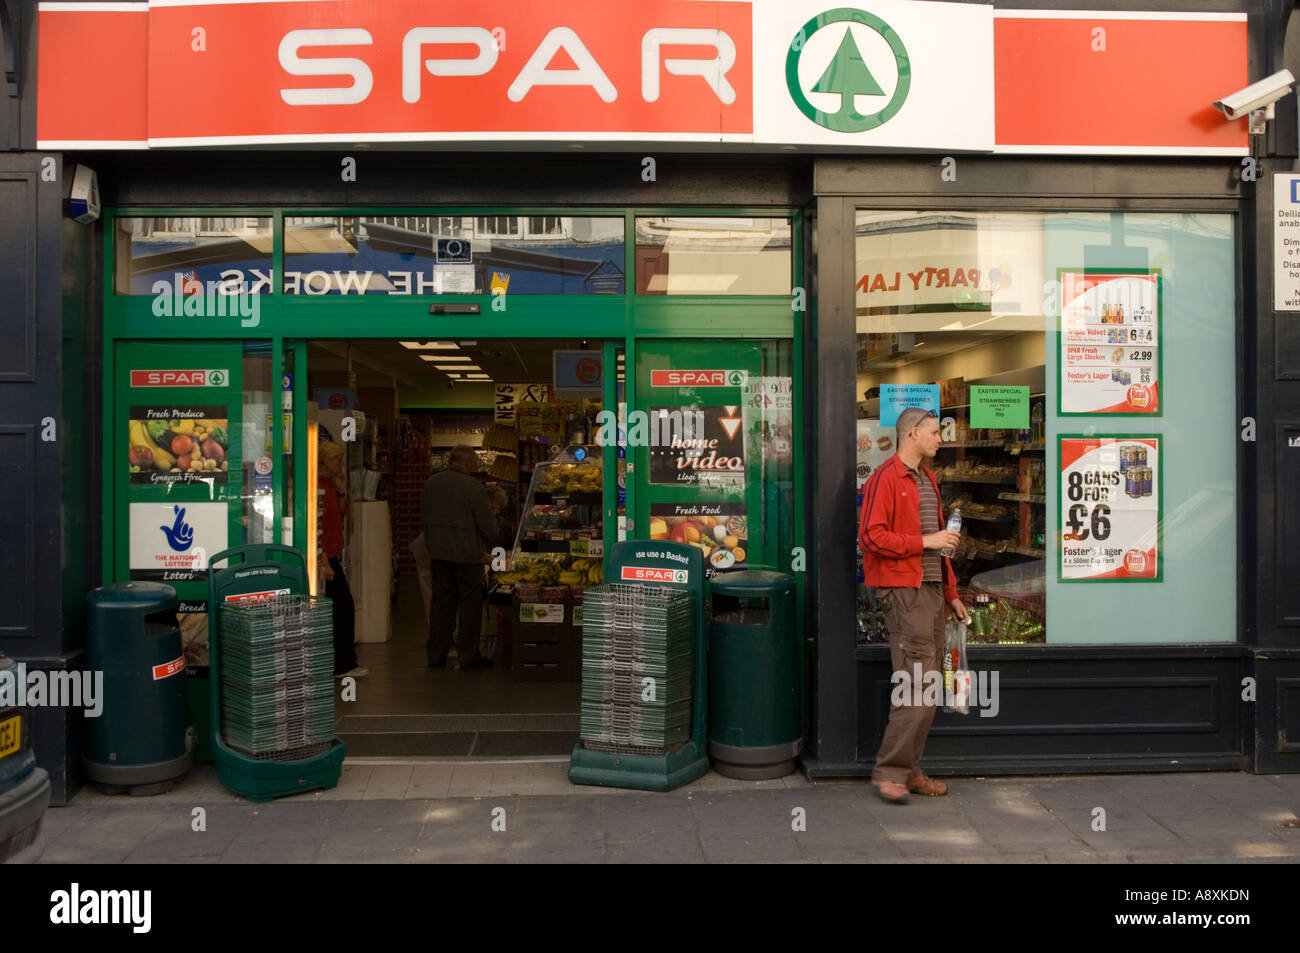 Spar convenience 24 hour opening food store  Aberystwyth Wales - exterior, open 24/7 Stock Photo